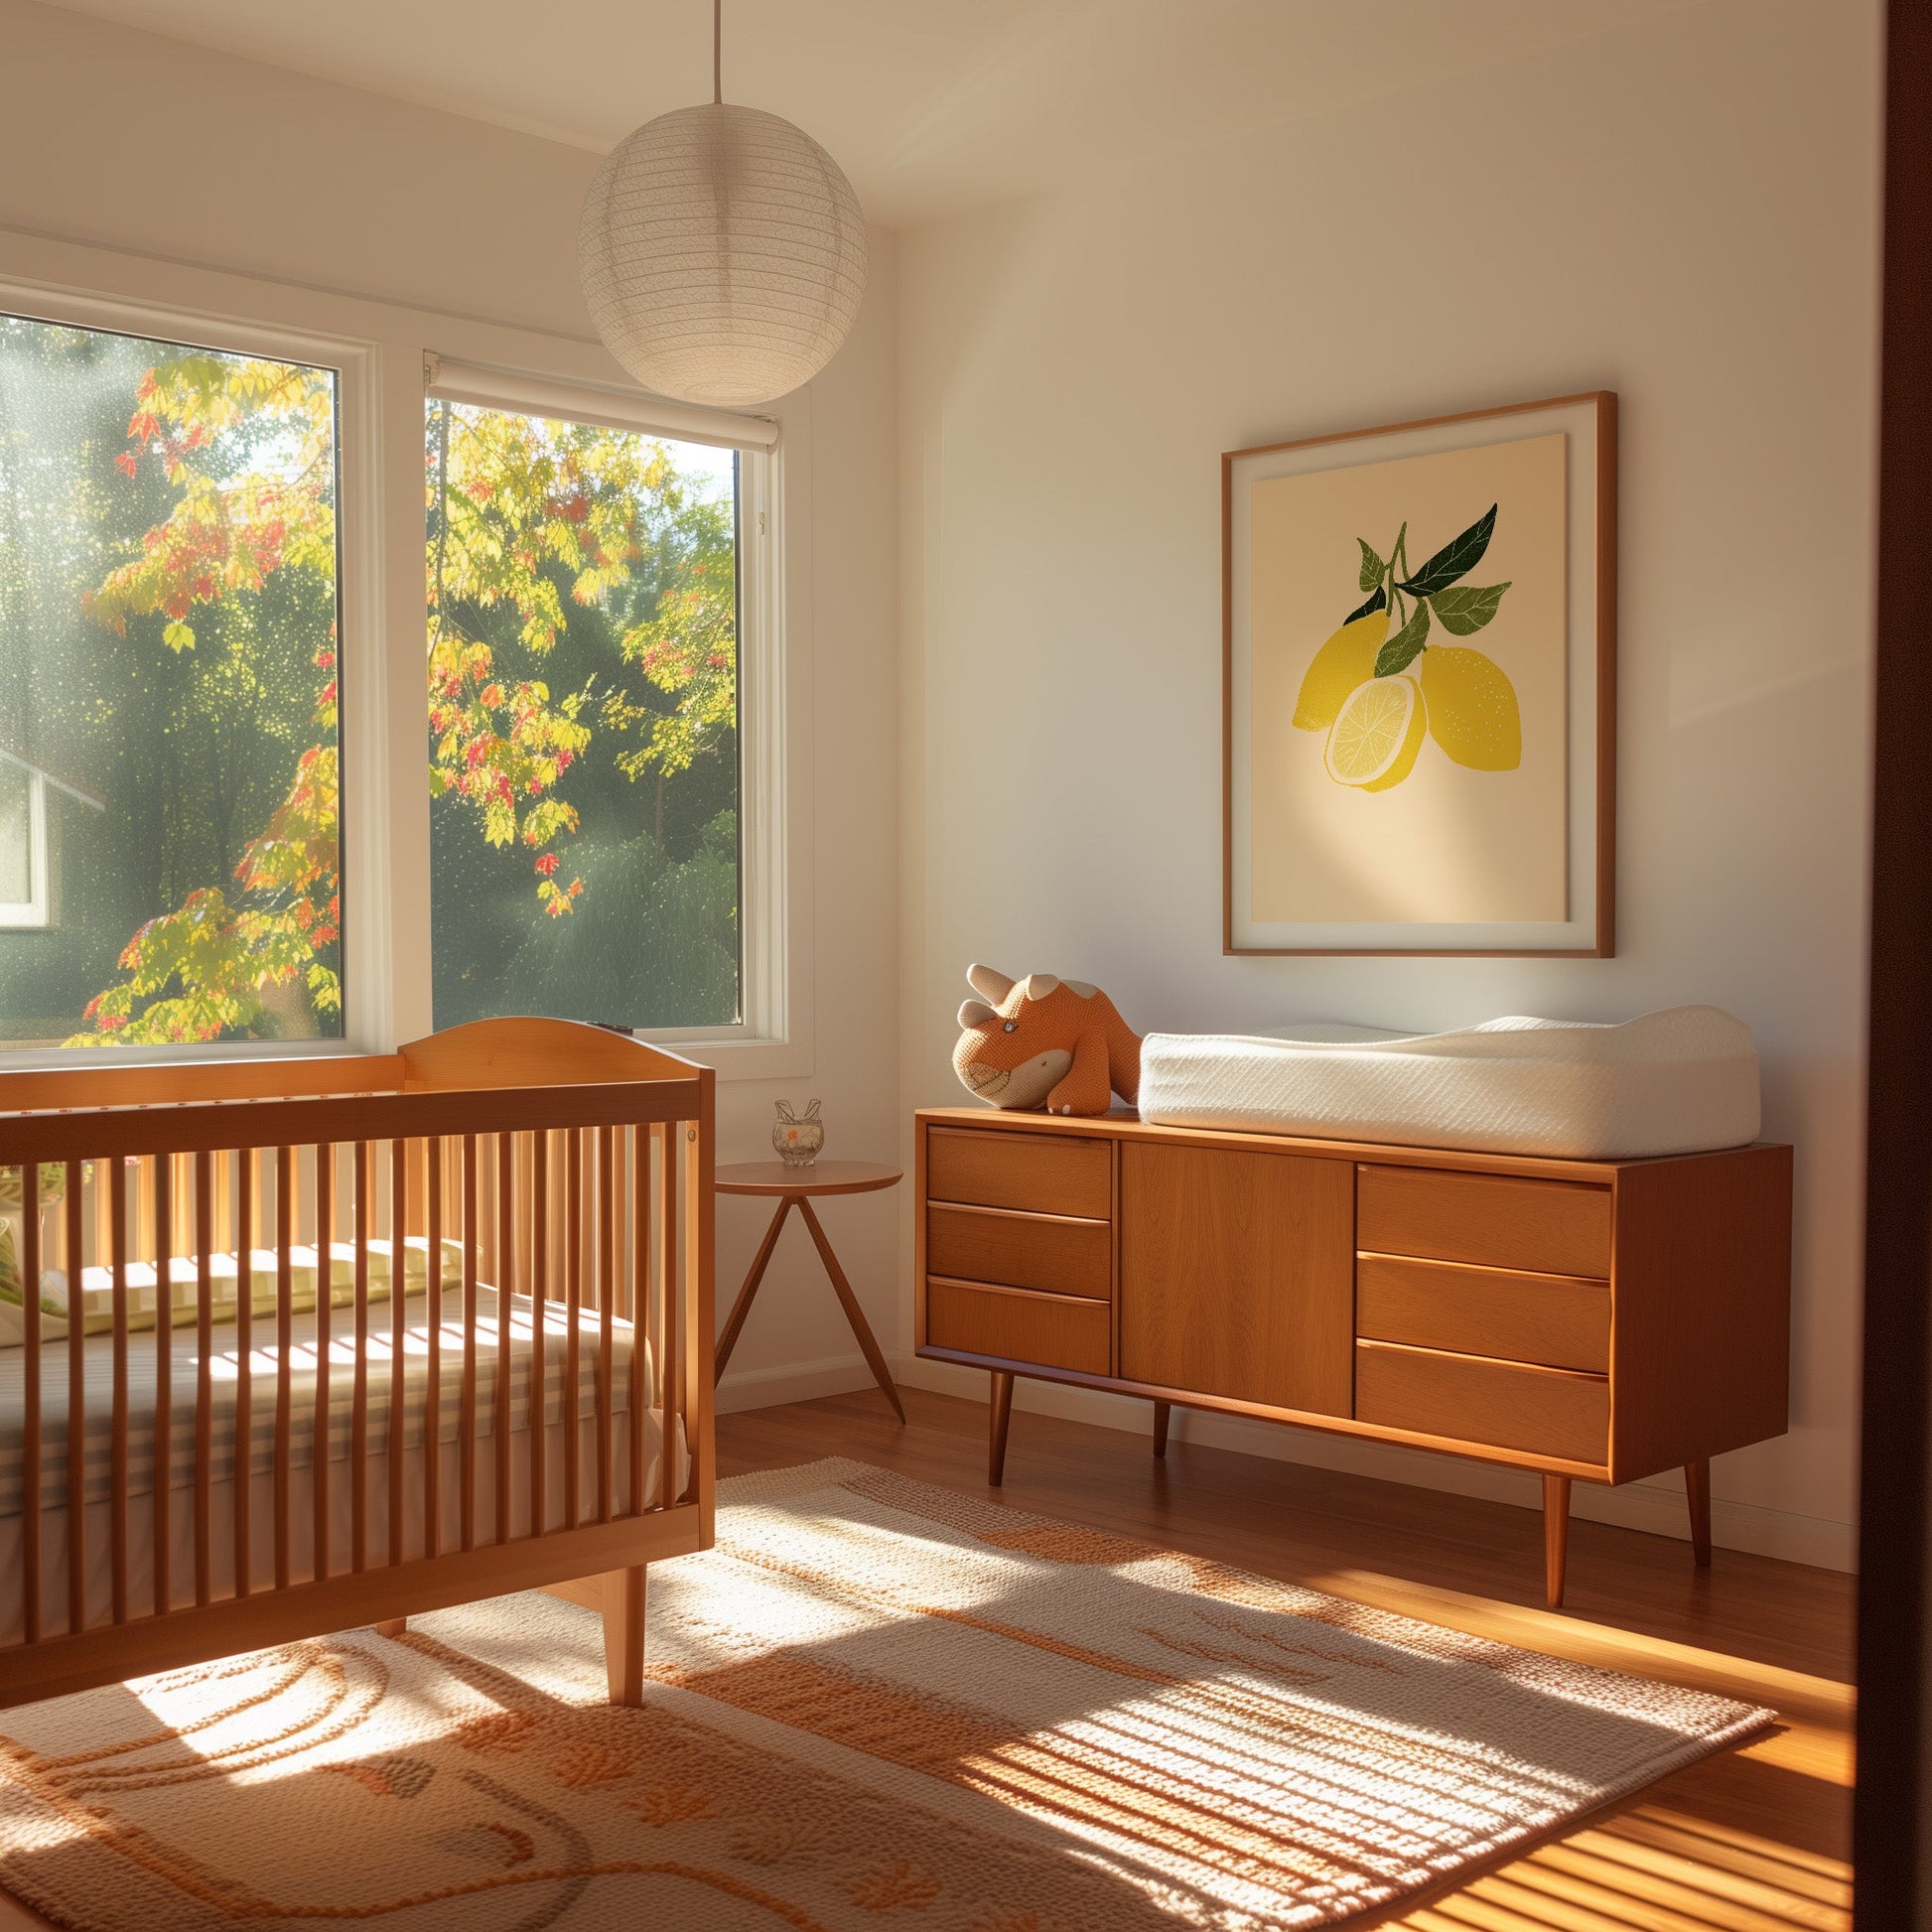 A cozy nursery with a crib, dresser, and warm sunlight filtering through autumn leaves outside the window.